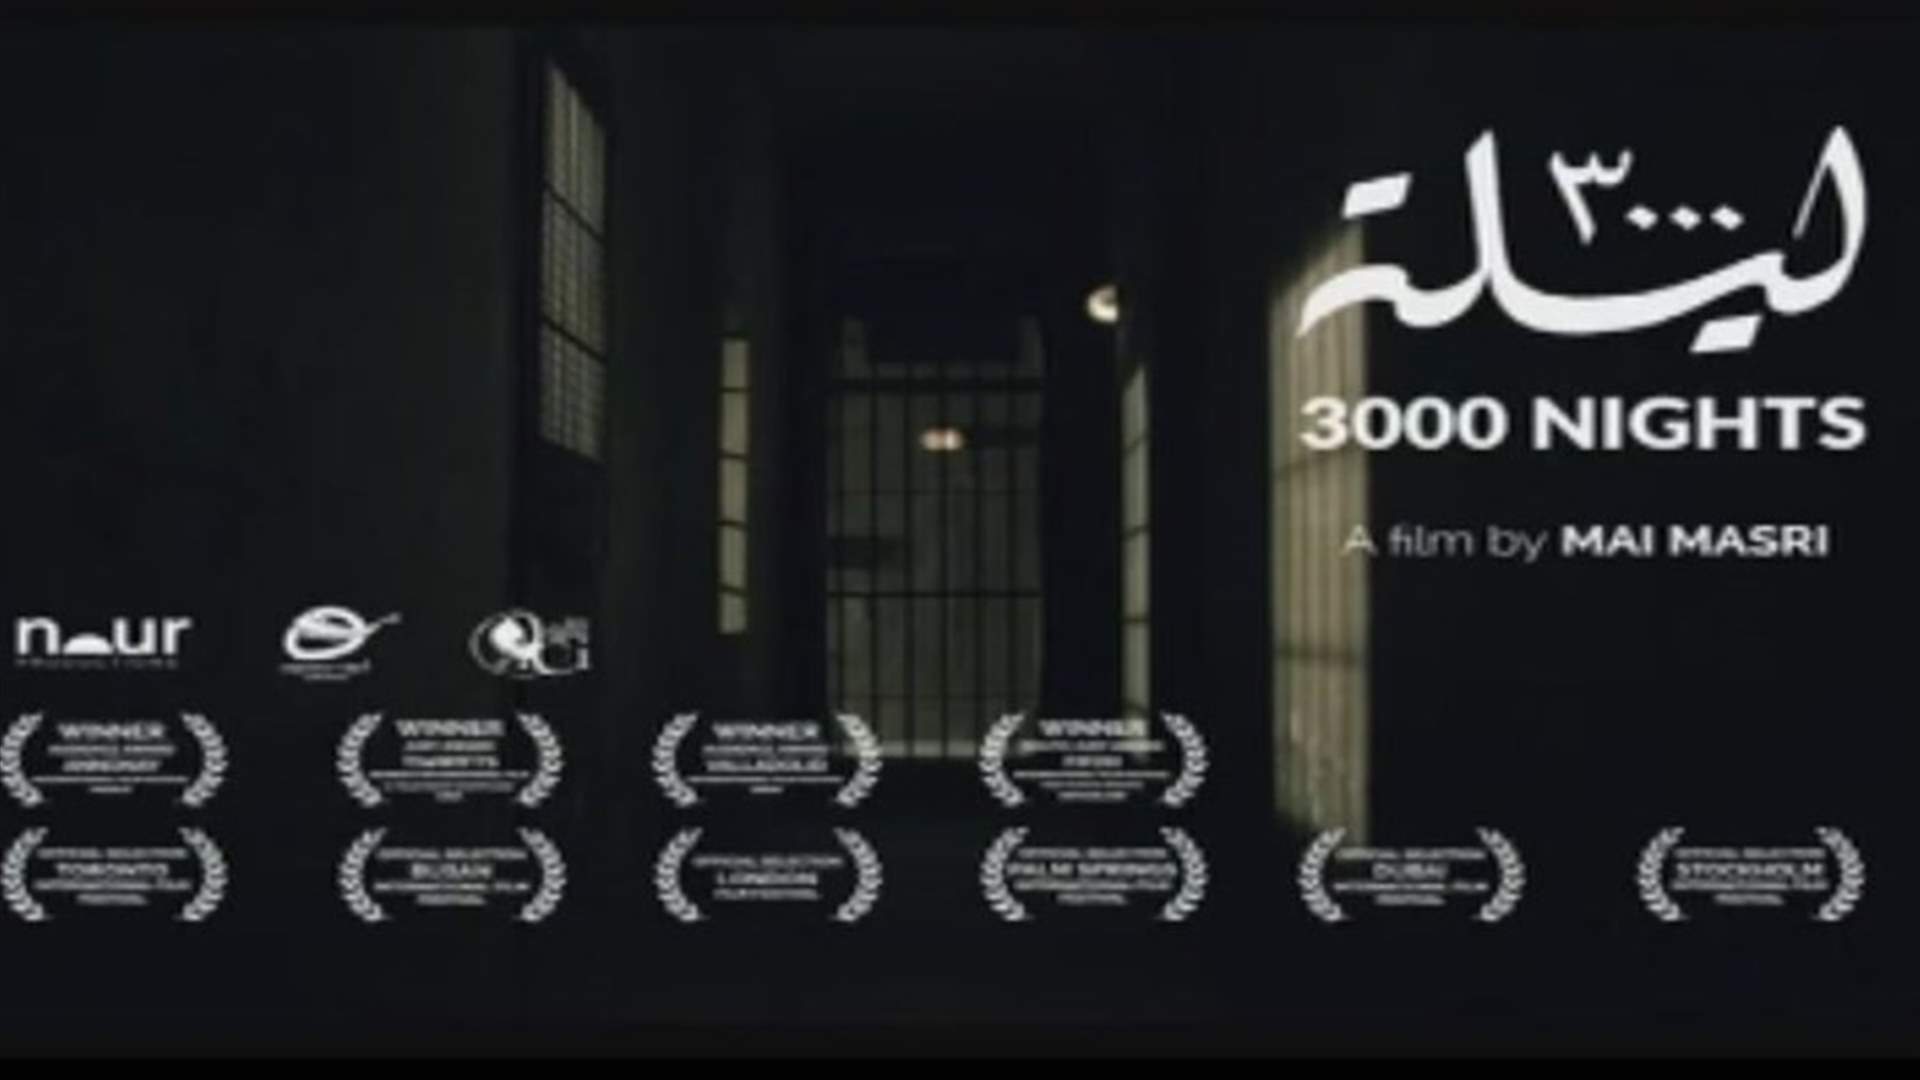 REPORT: Palestinian film “3000 Nights” released in Lebanese theaters 